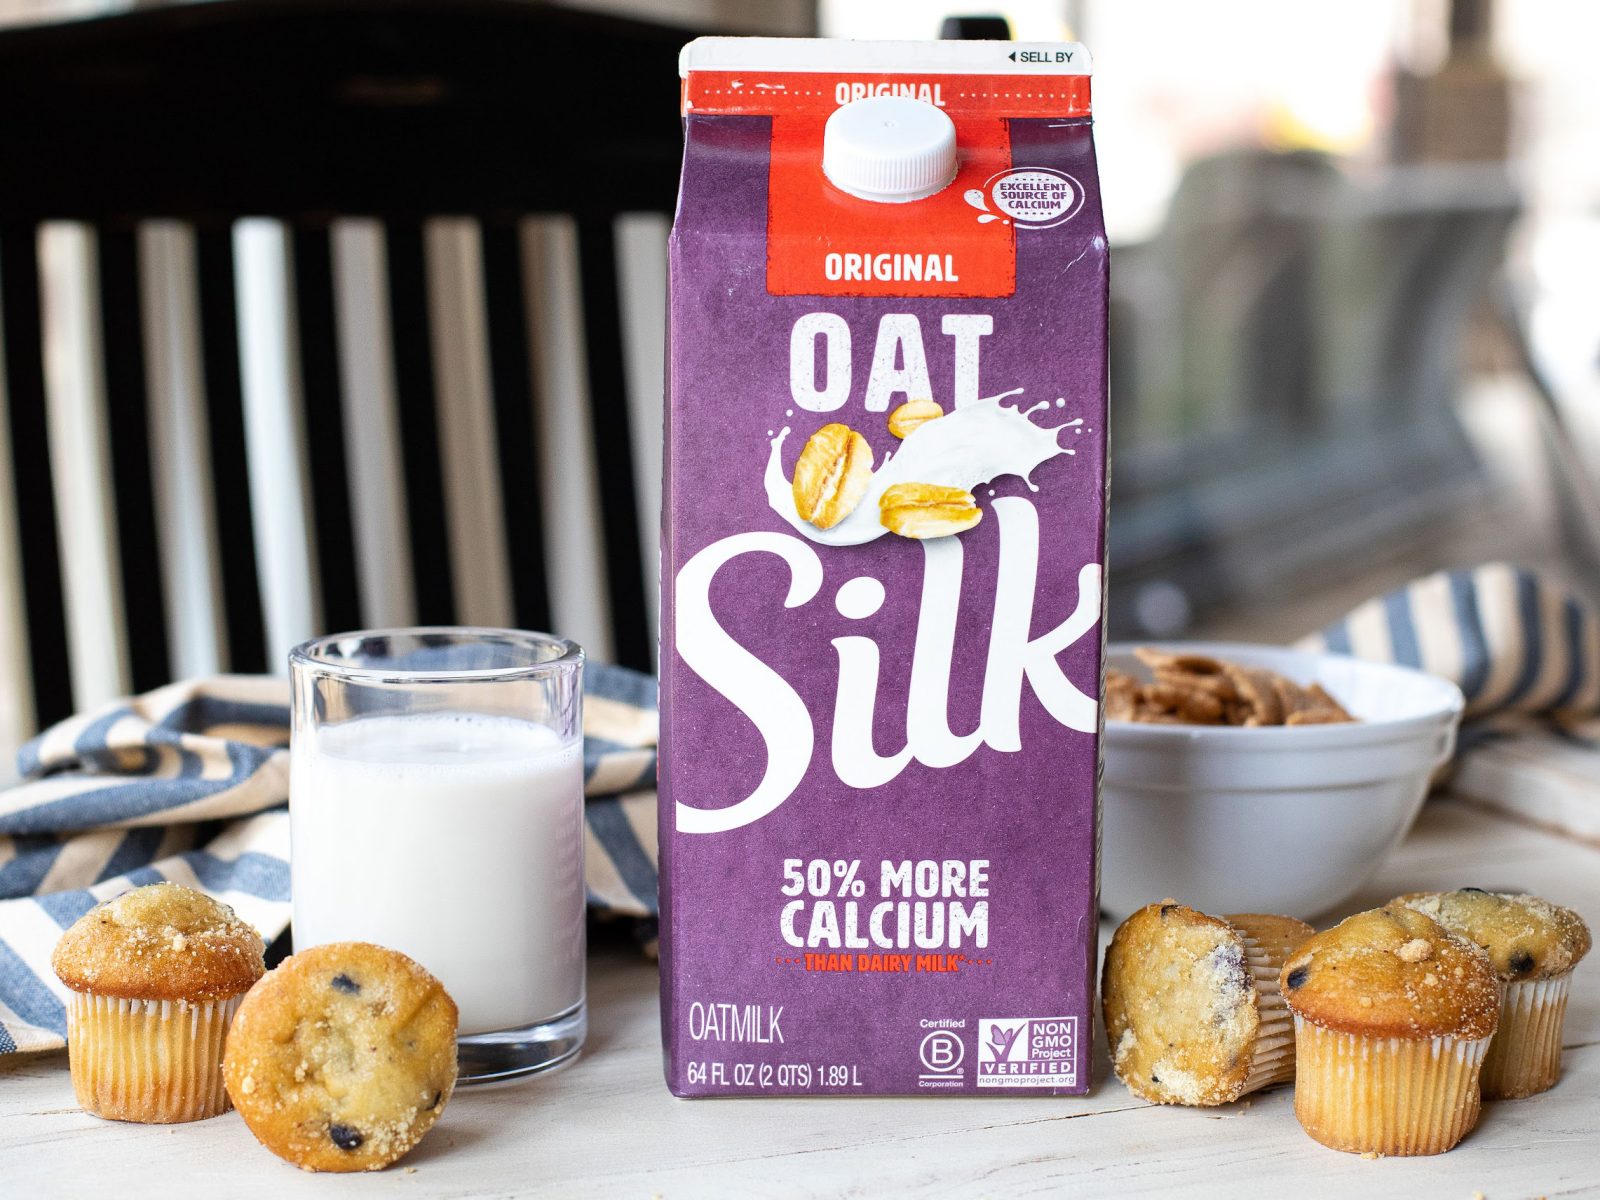 Delicious Silk Oatmilk Is On Sale This Week At Publix – Grab A Carton For Just $1